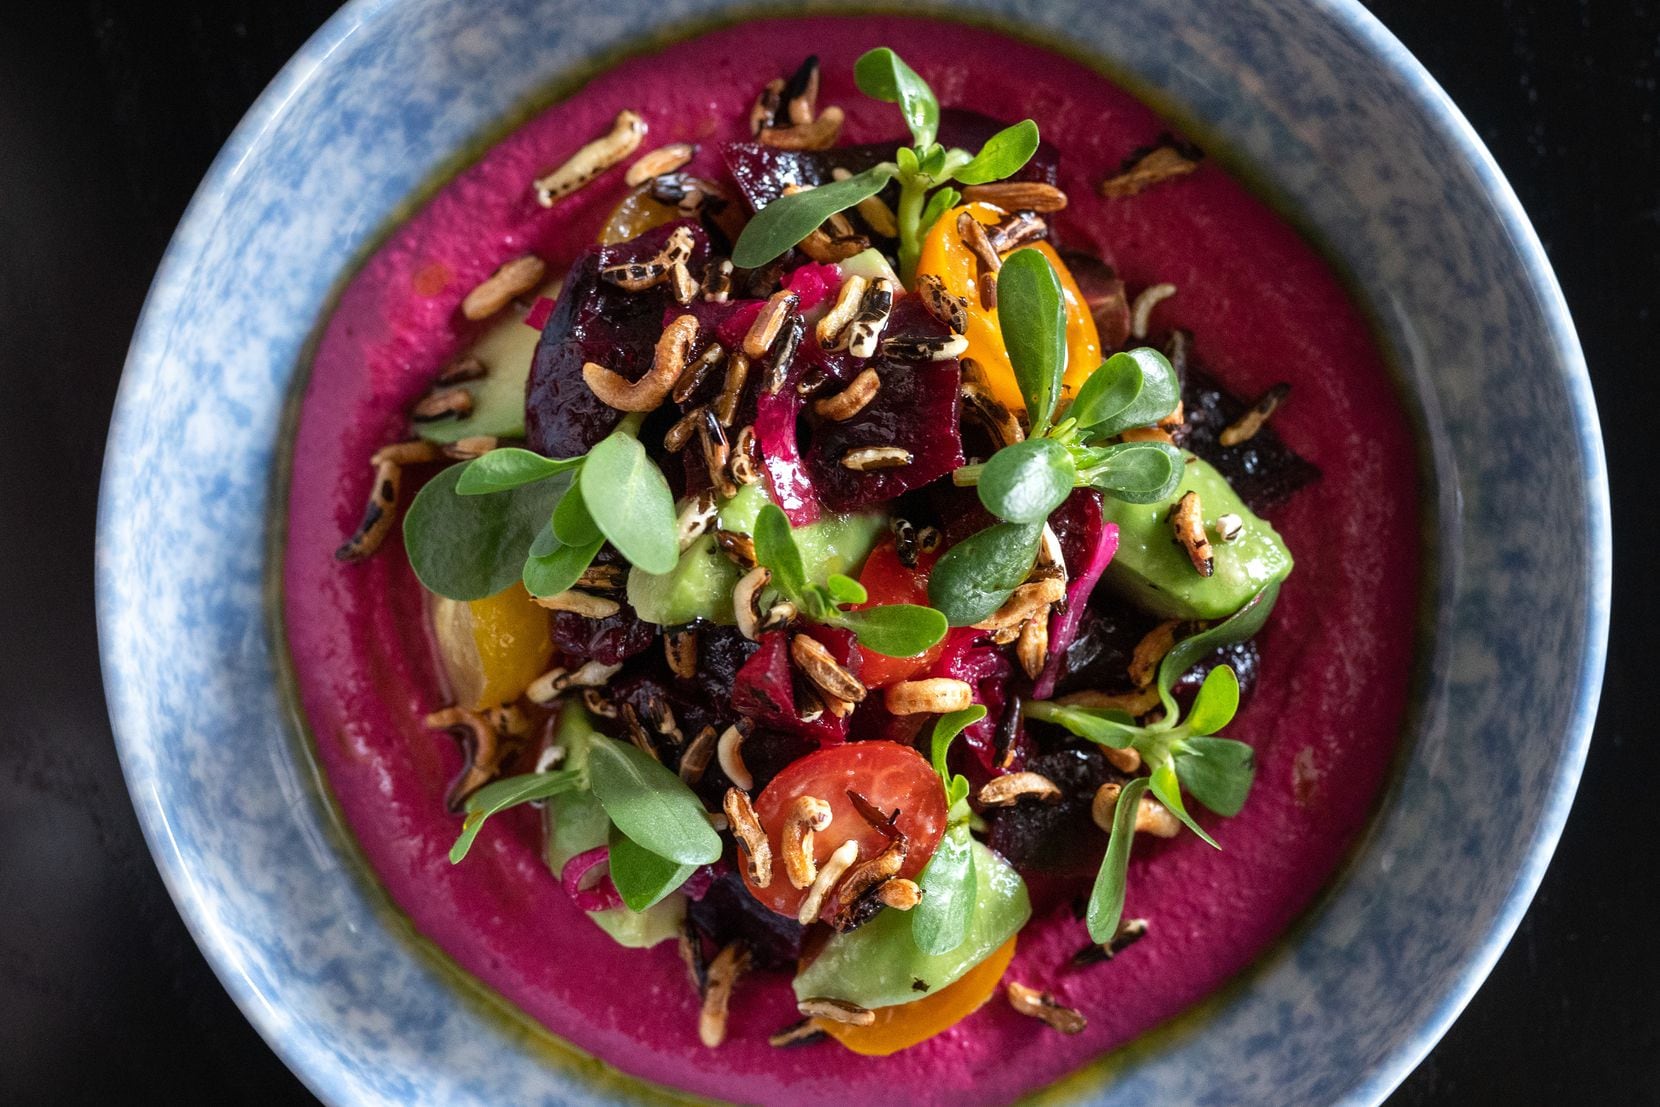 Beets and avocado with tahini, lemon vinaigrette and wild rice is one of the starters at...